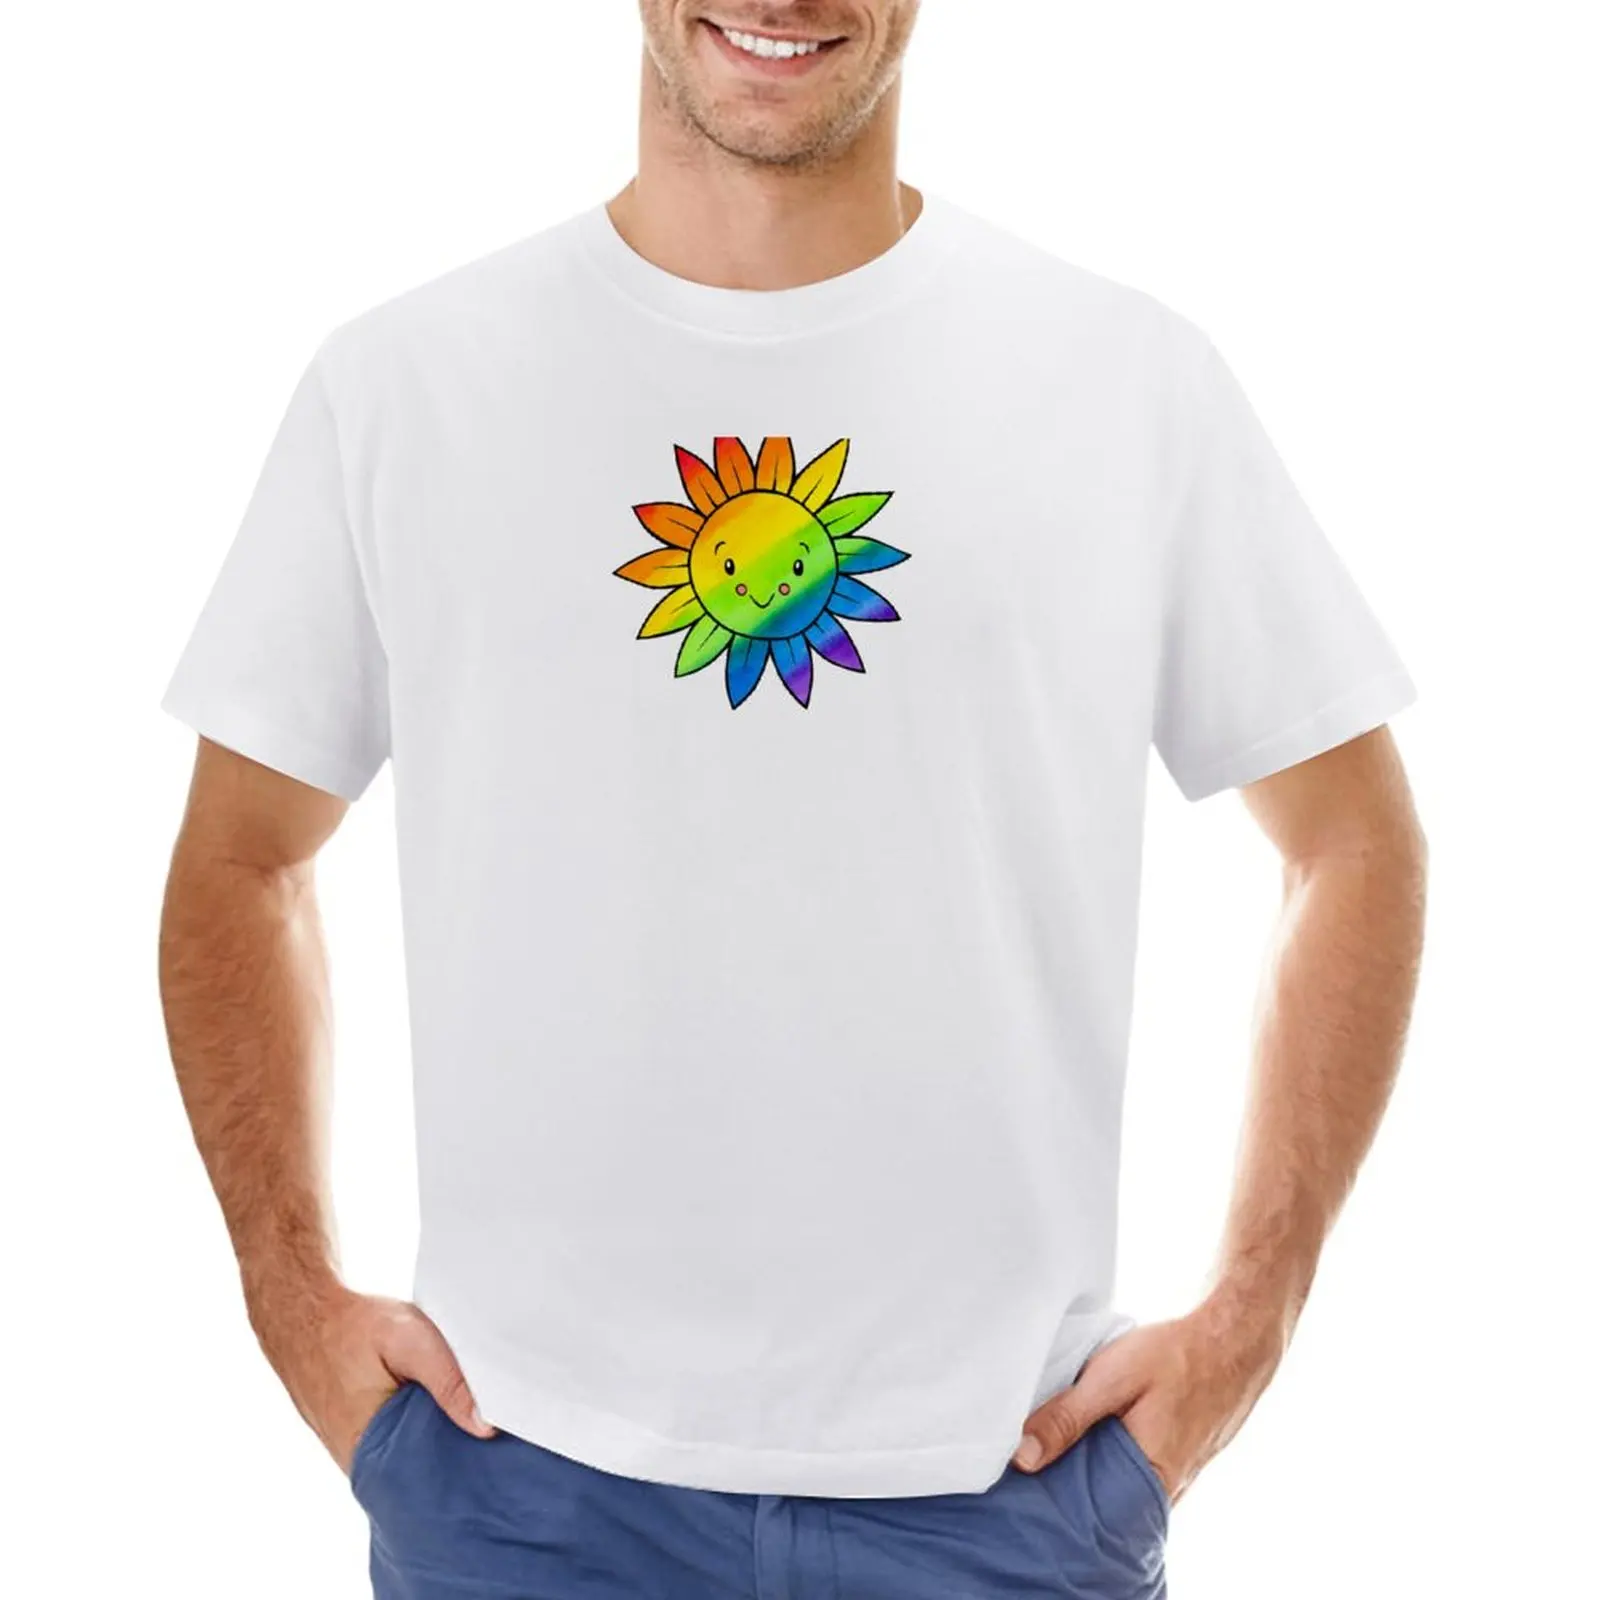 

Rainbow Sunflower - Pembina Valley Pride (by Sarah Neville) T-Shirt quick drying oversizeds anime men clothes